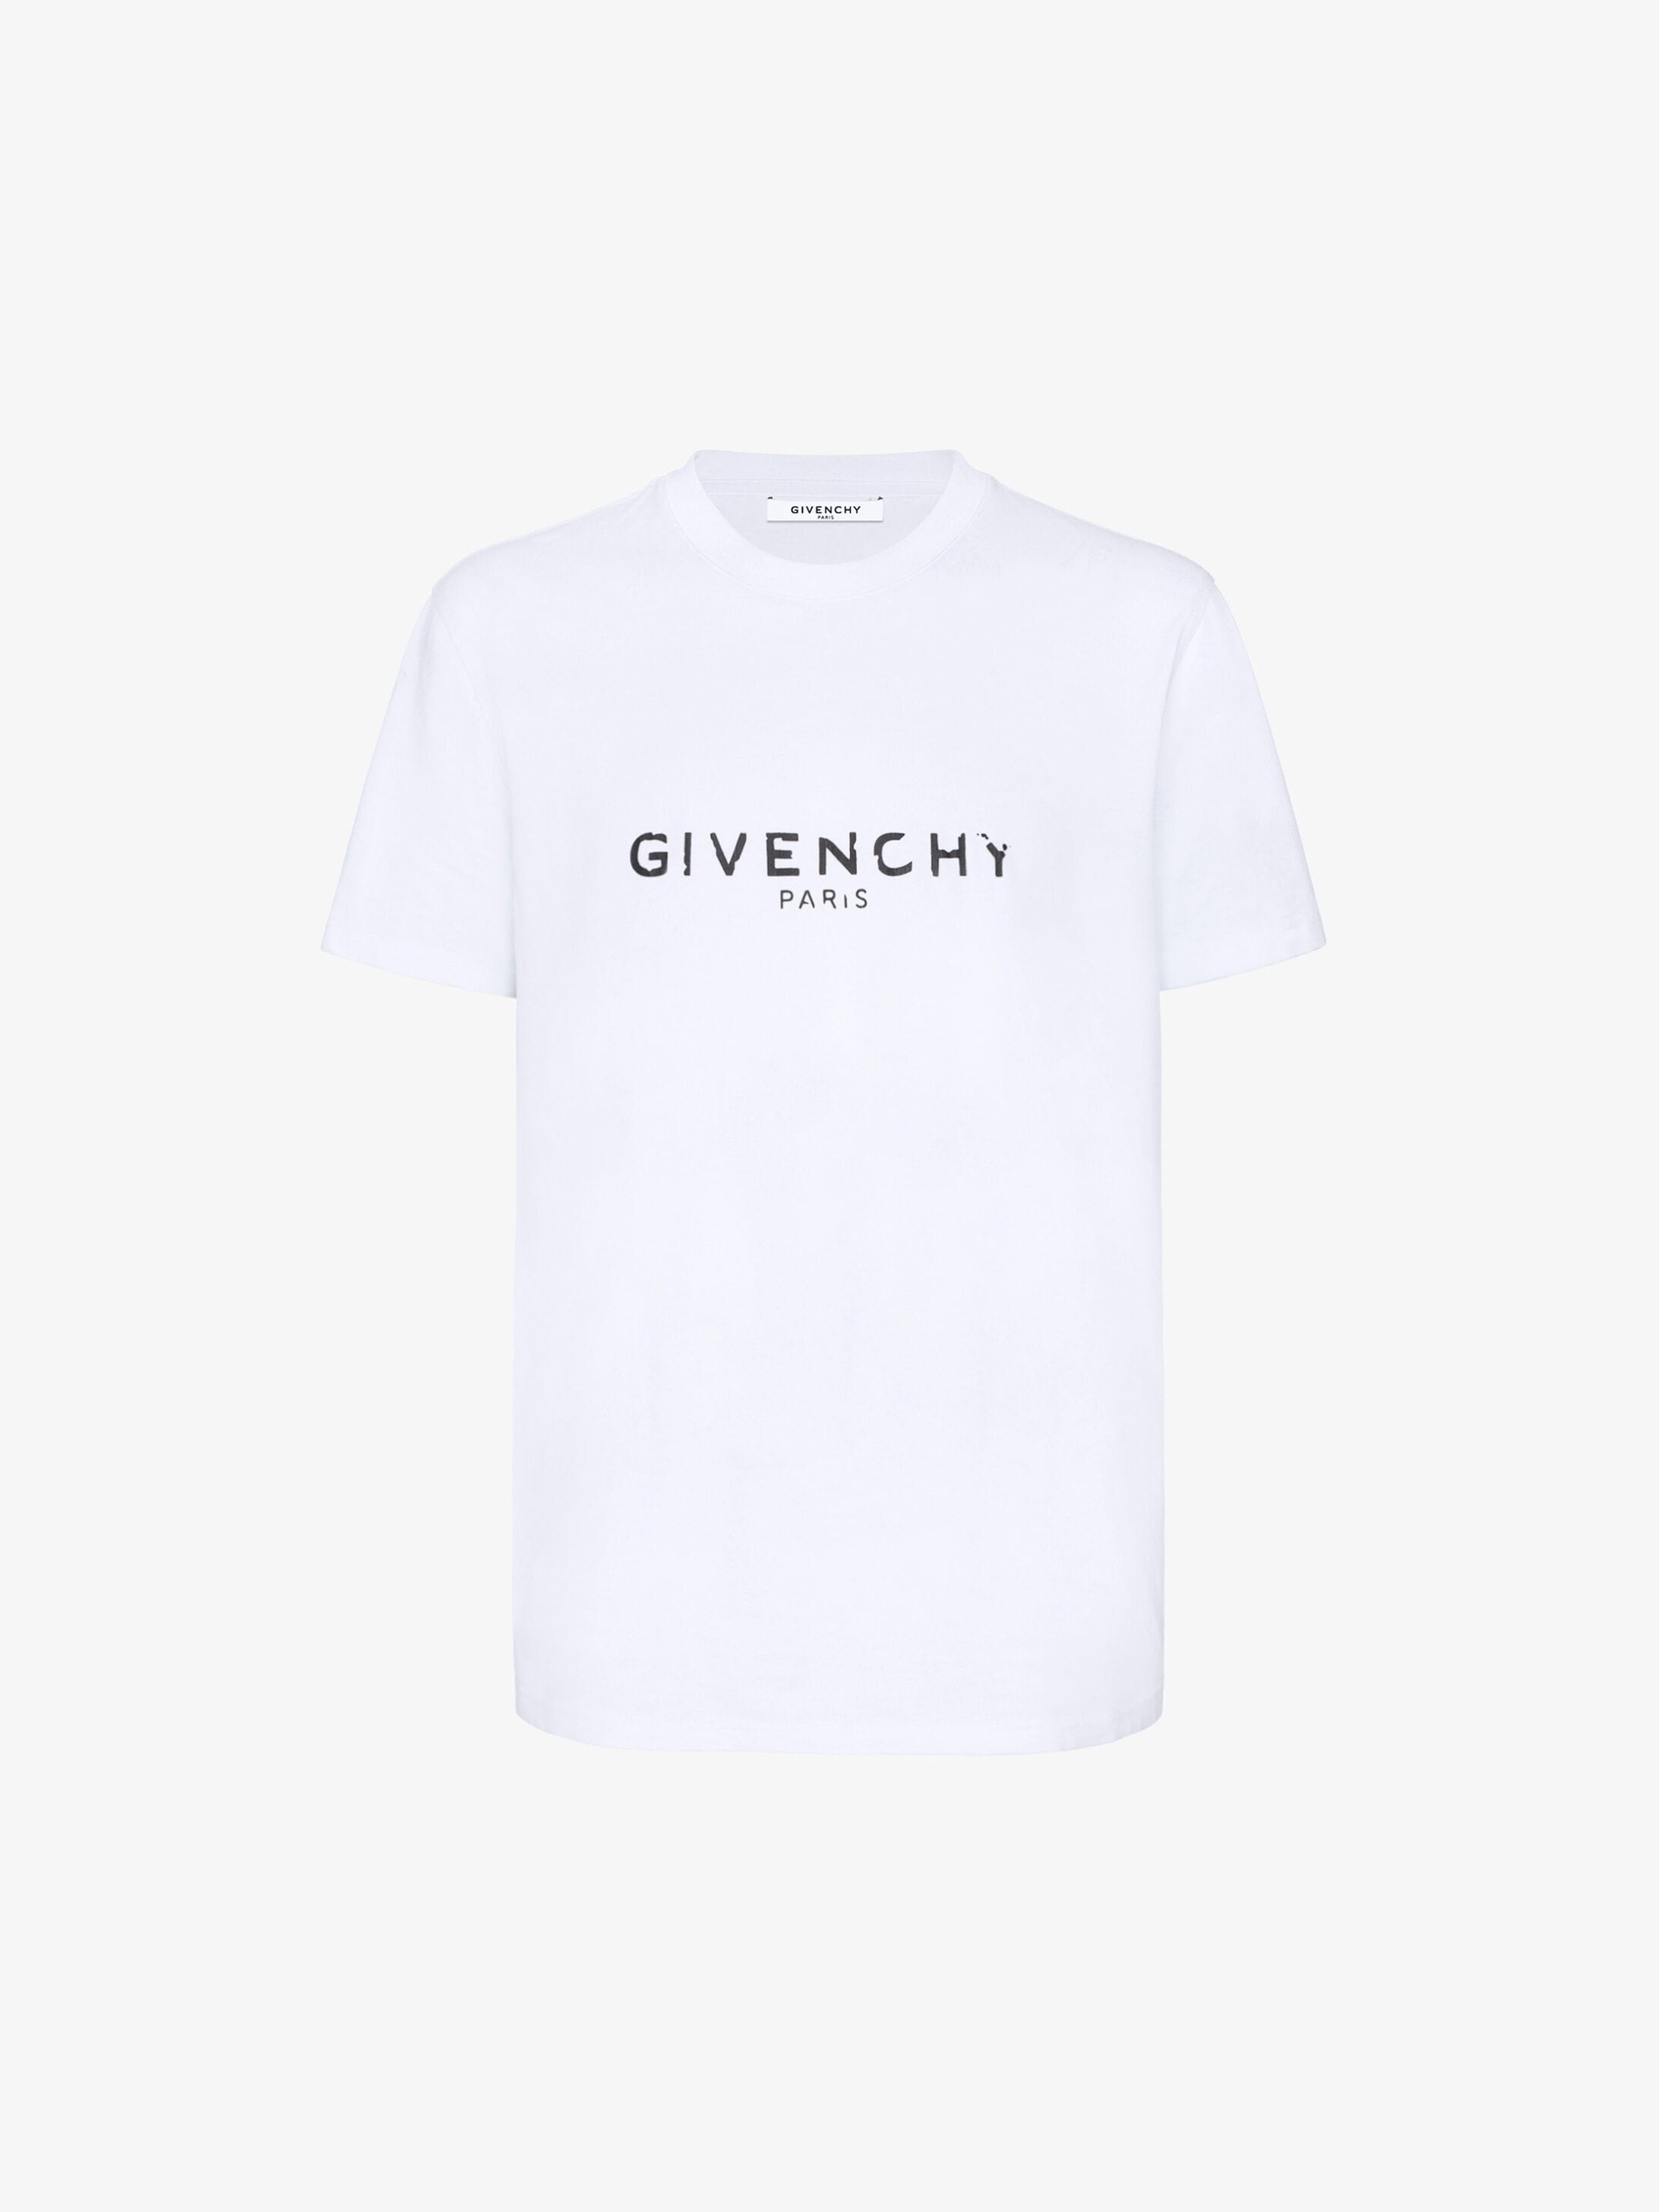 givenchy white top